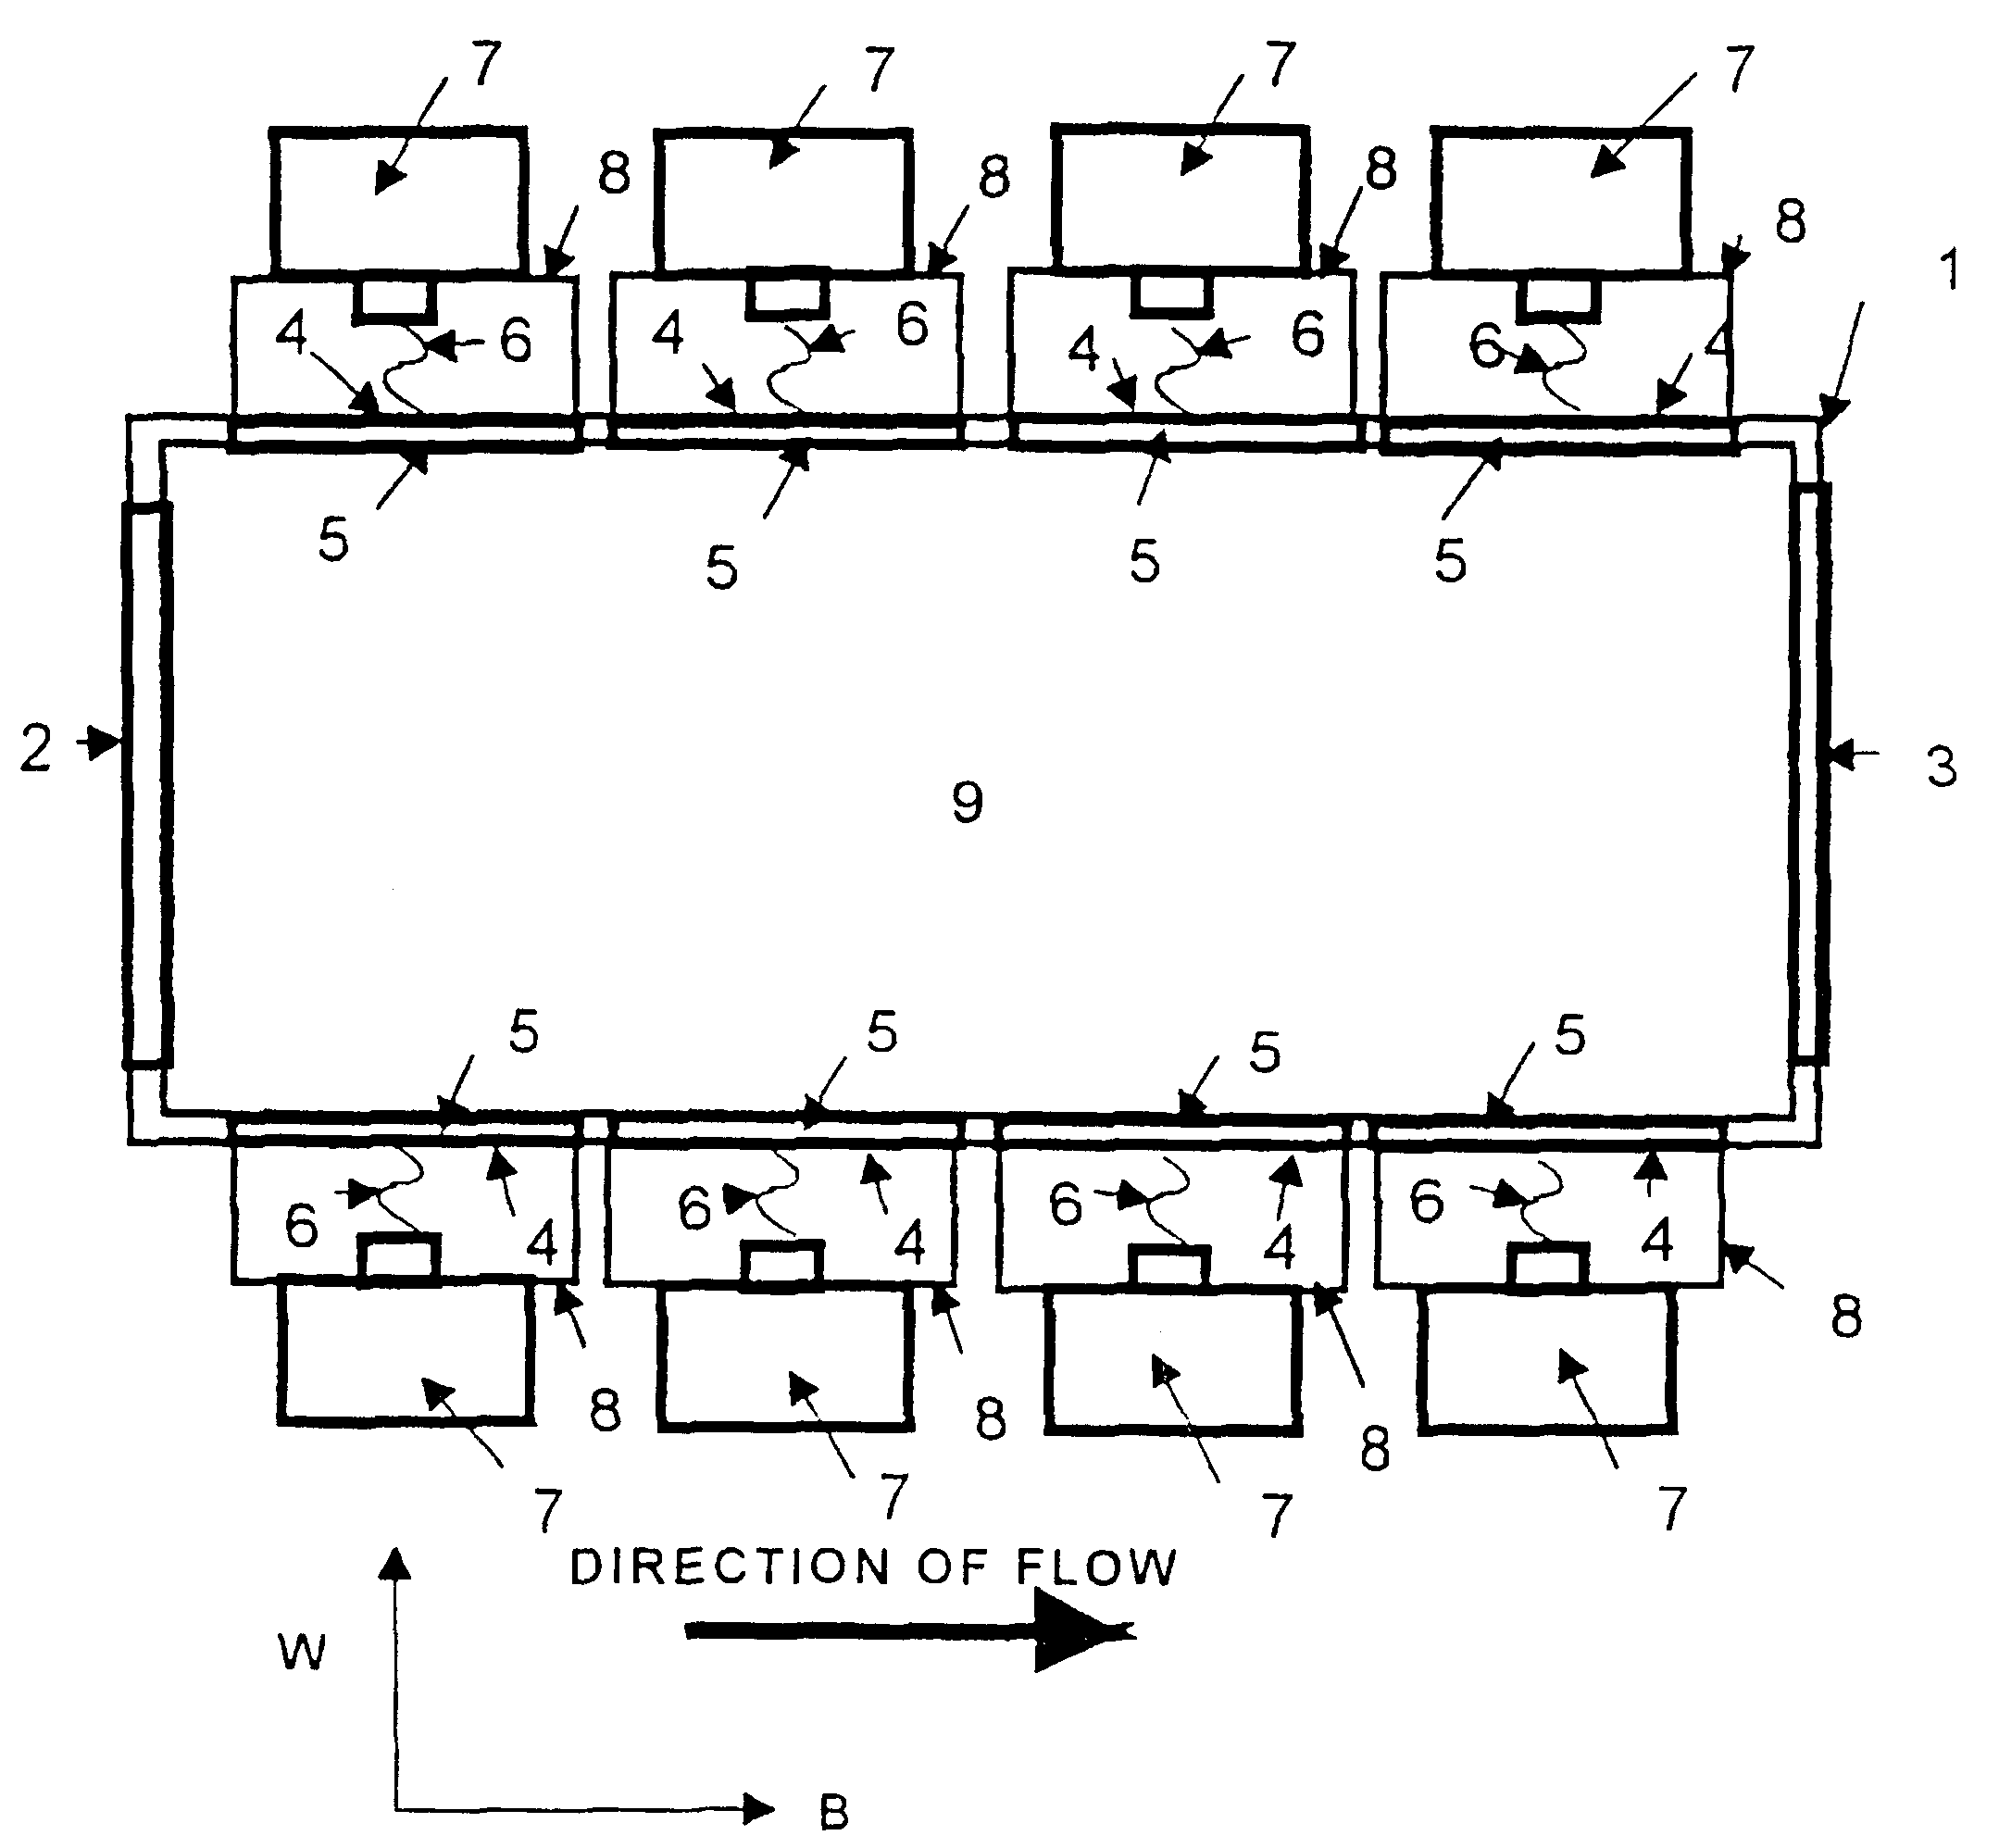 Artificial dielectric device for heating gases with electromagnetic energy